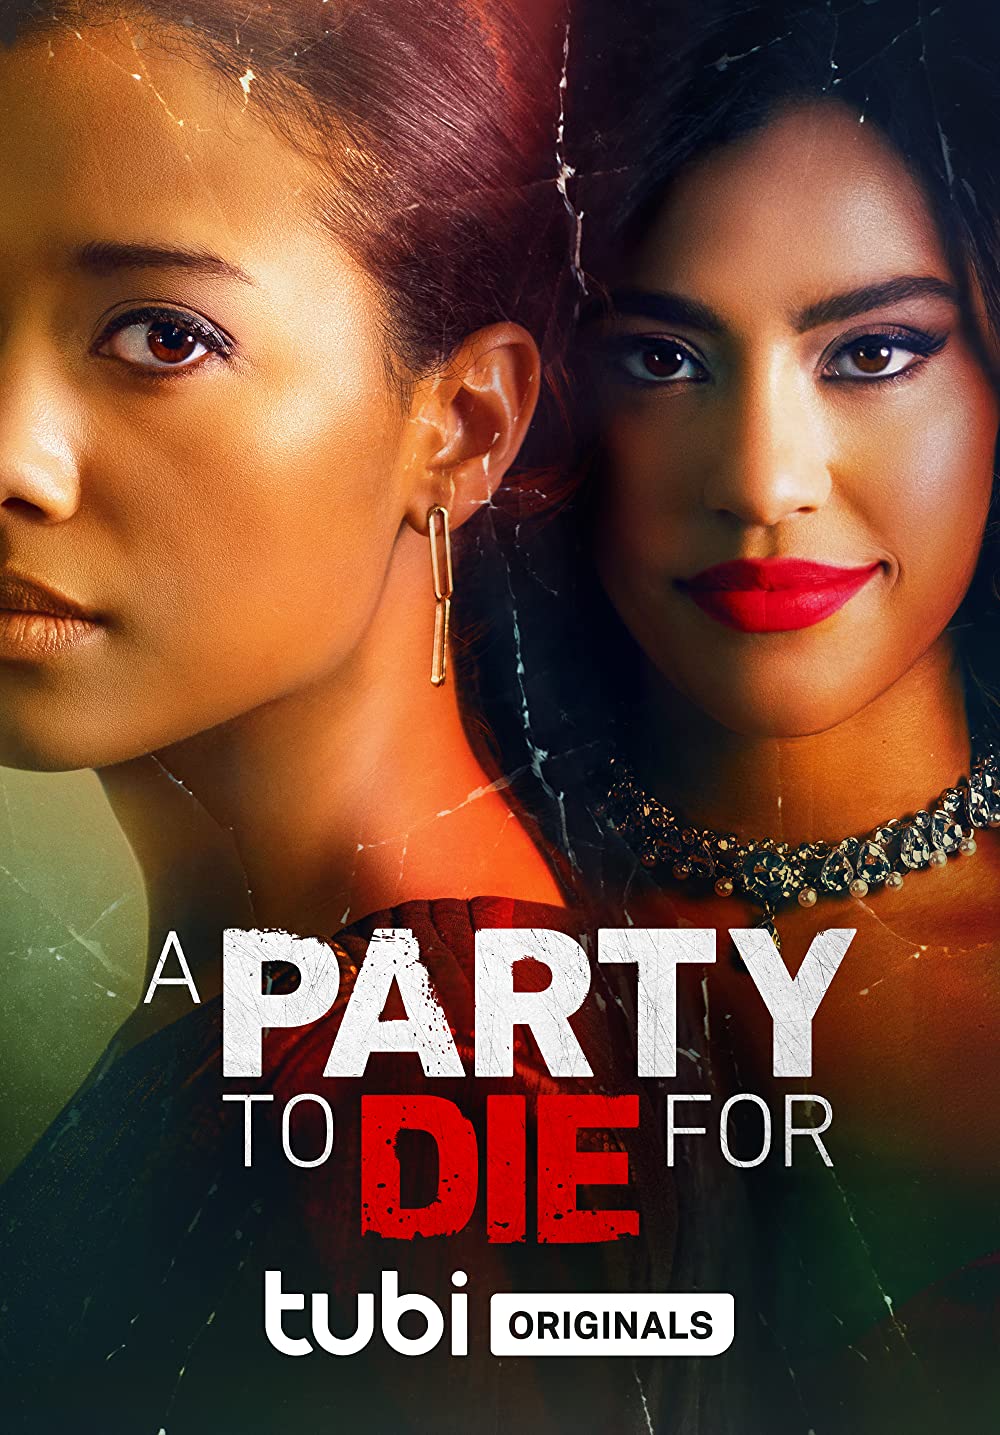 A Party To Die For 2022 English 480p HDRip ESub 300MB Download